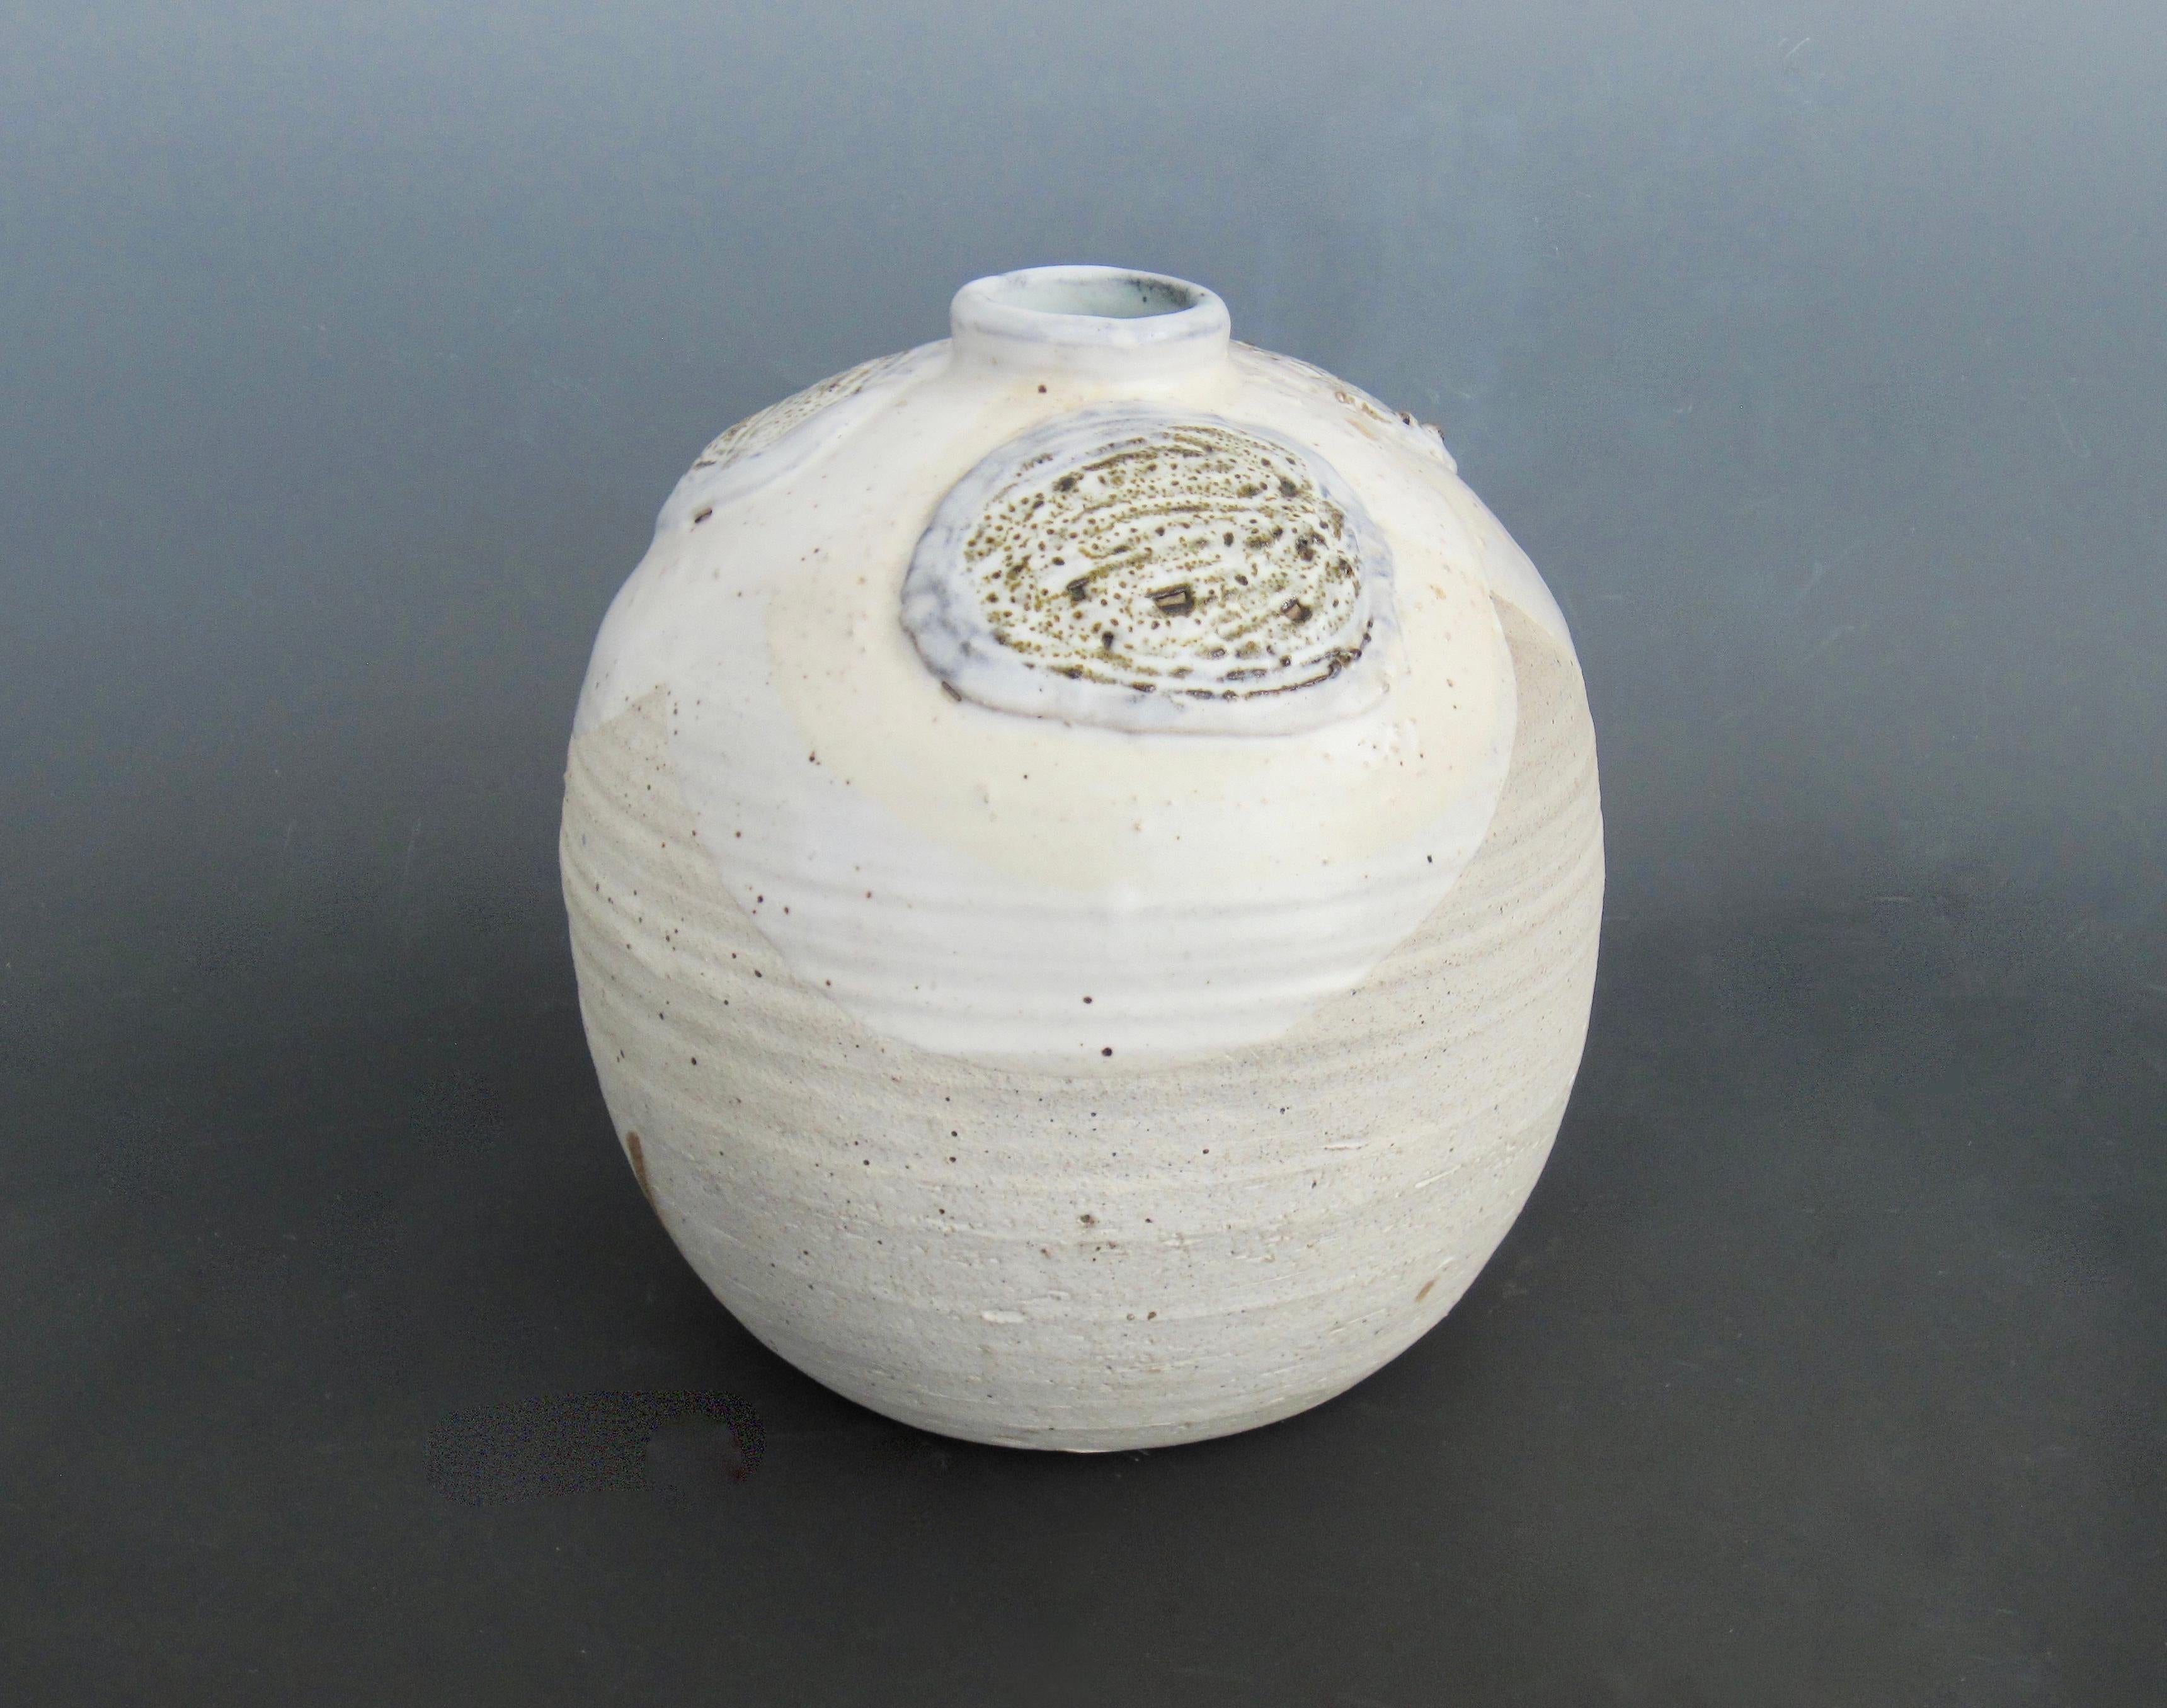 Mid-century modernist signed stoneware pottery vase in shades of white and tan. Three glazed textural circular motifs around the bottleneck and repeating circumference lines to the bottom make this vase visually and proportionally pleasing to the